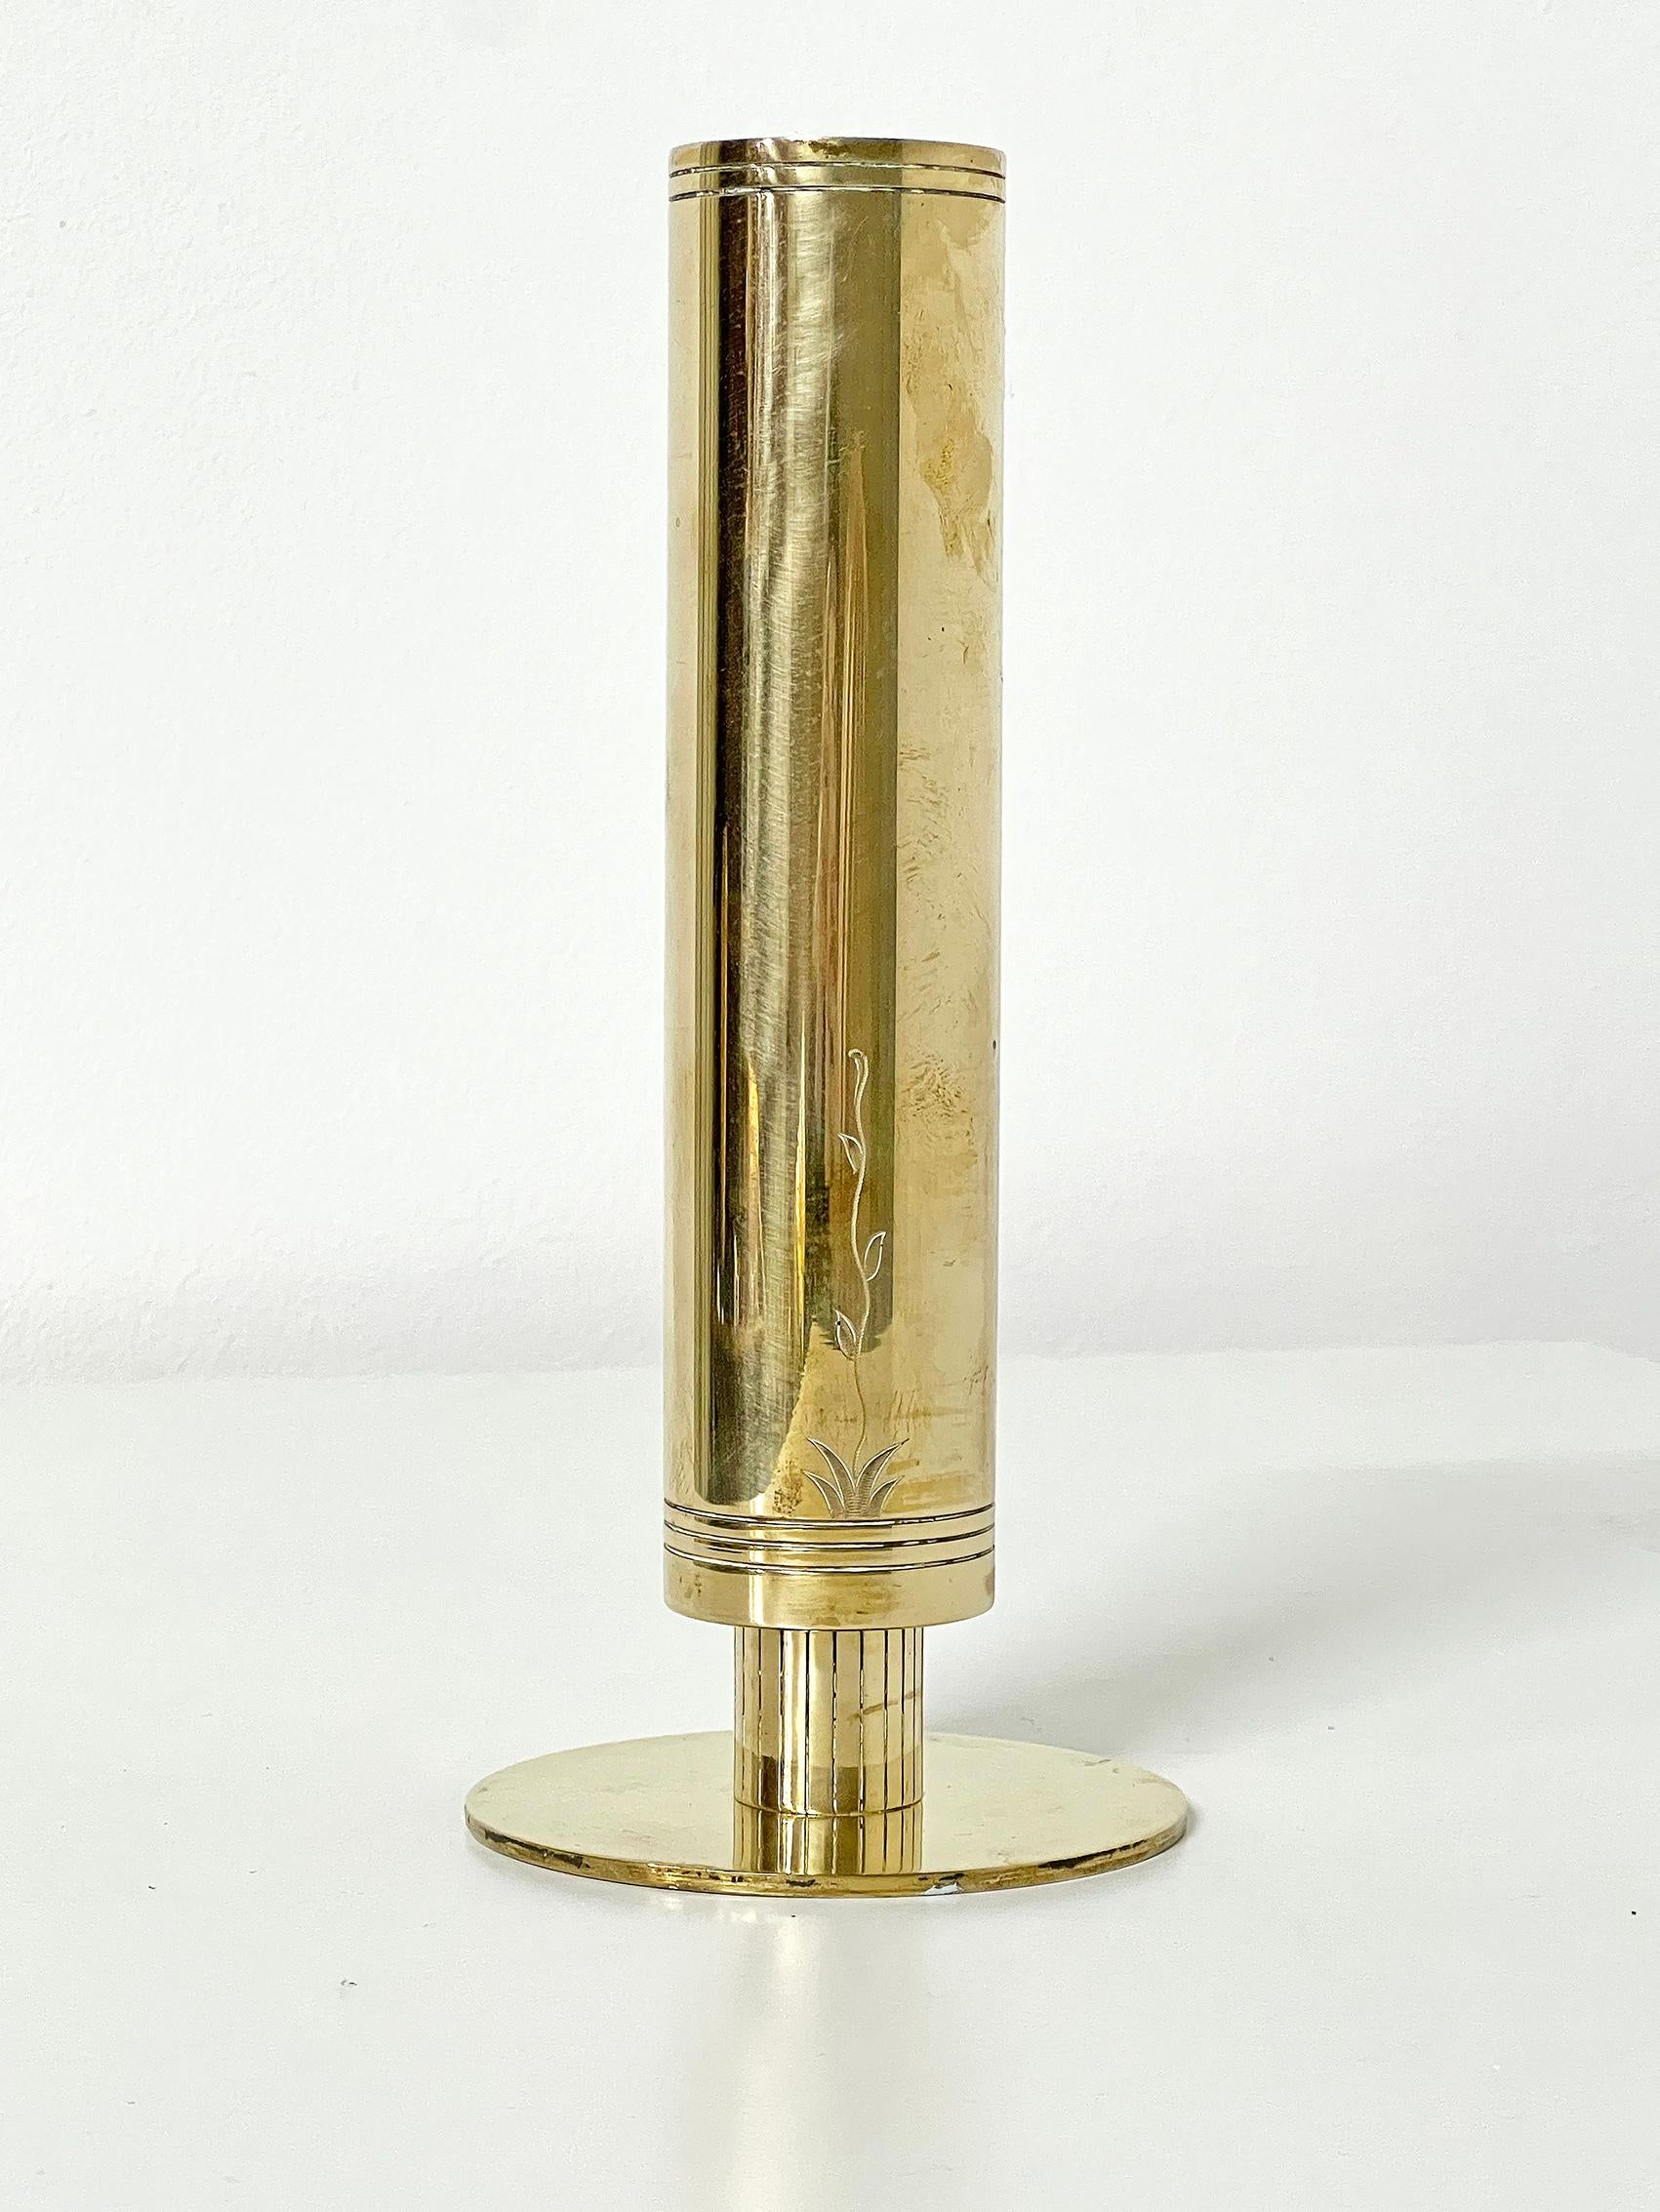 Beautiful Scandinavian Modern vase in brass, anonymous, ca 1950's - 1960's.
Good vintage condition, wear and patina consistent with age and use. 
Brass patina, scratches and marks, some smaller rust spots. Wear inside the vase. 